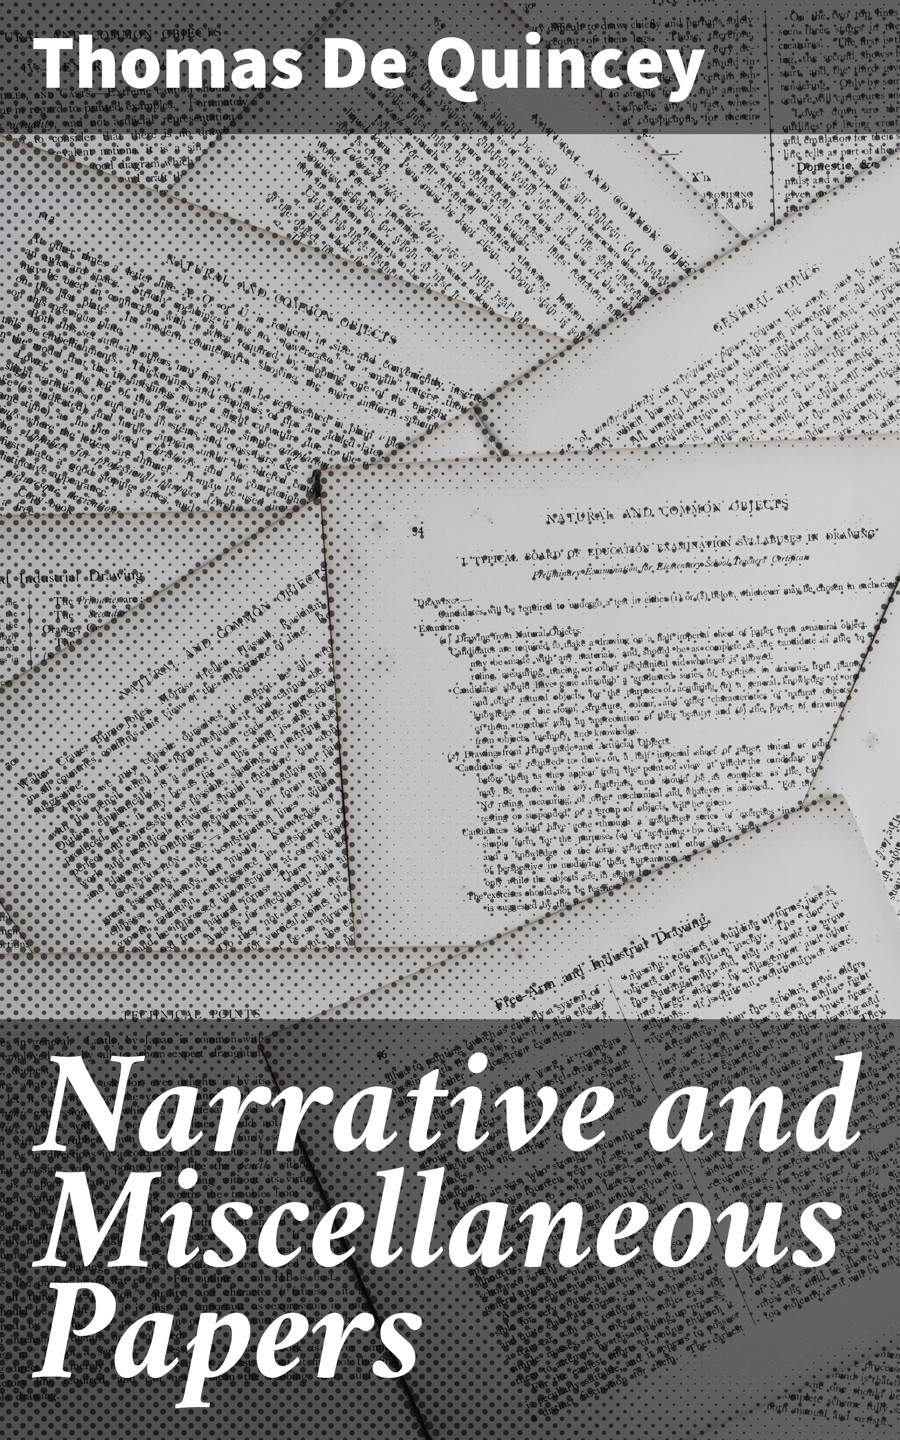 Narrative and Miscellaneous Papers